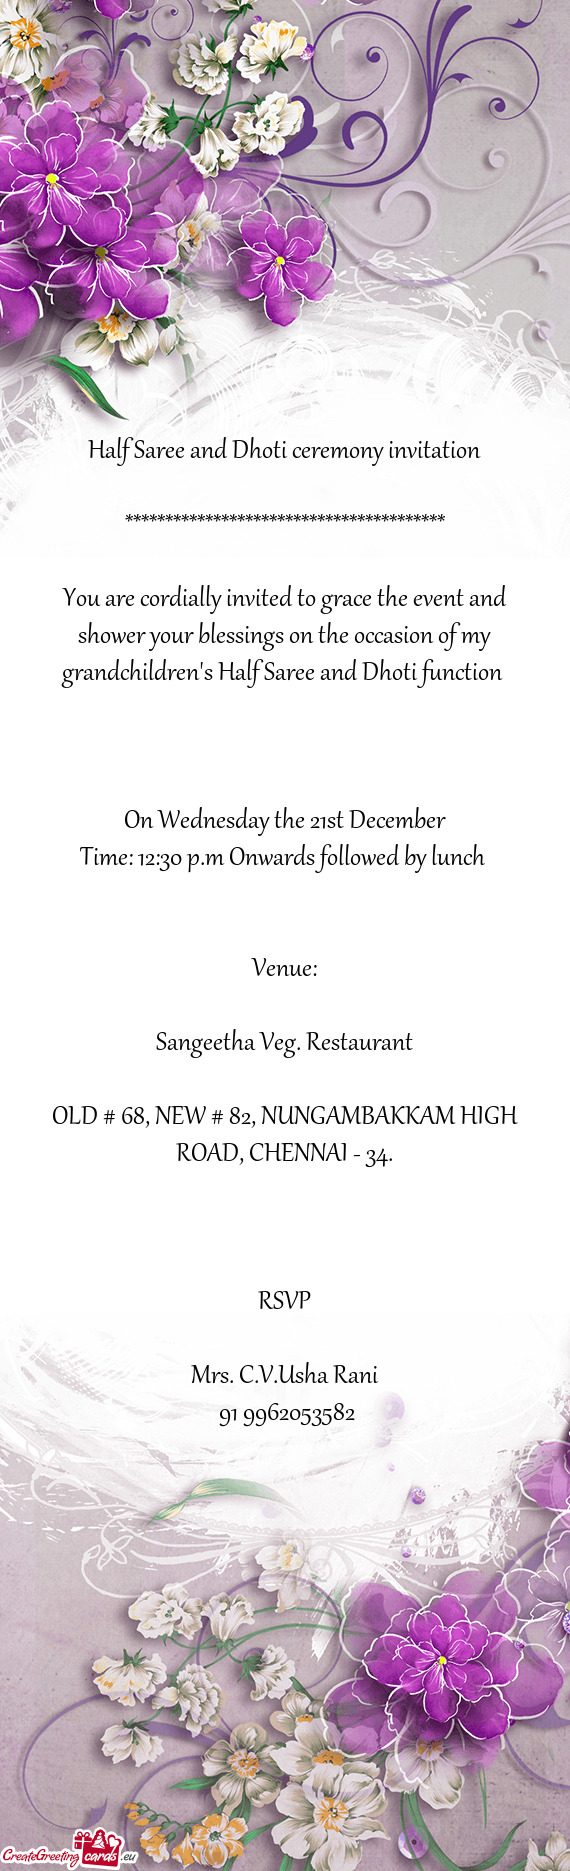 You are cordially invited to grace the event and shower your blessings on the occasion of my grandch